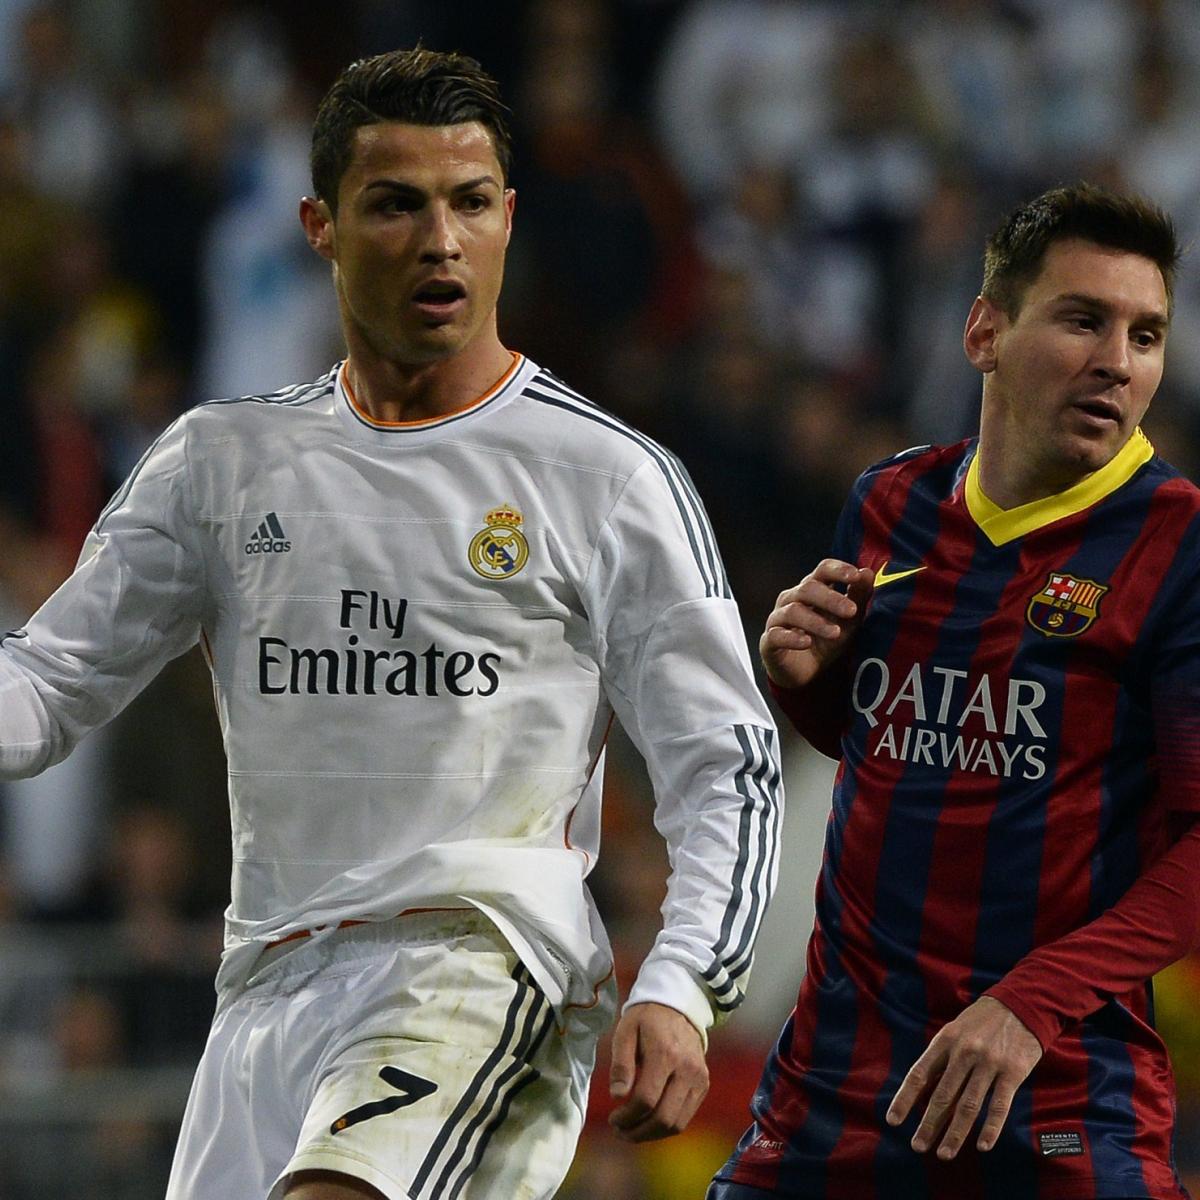 Ronaldo vs Messi in El Clasico - Who has the best stats, goals and